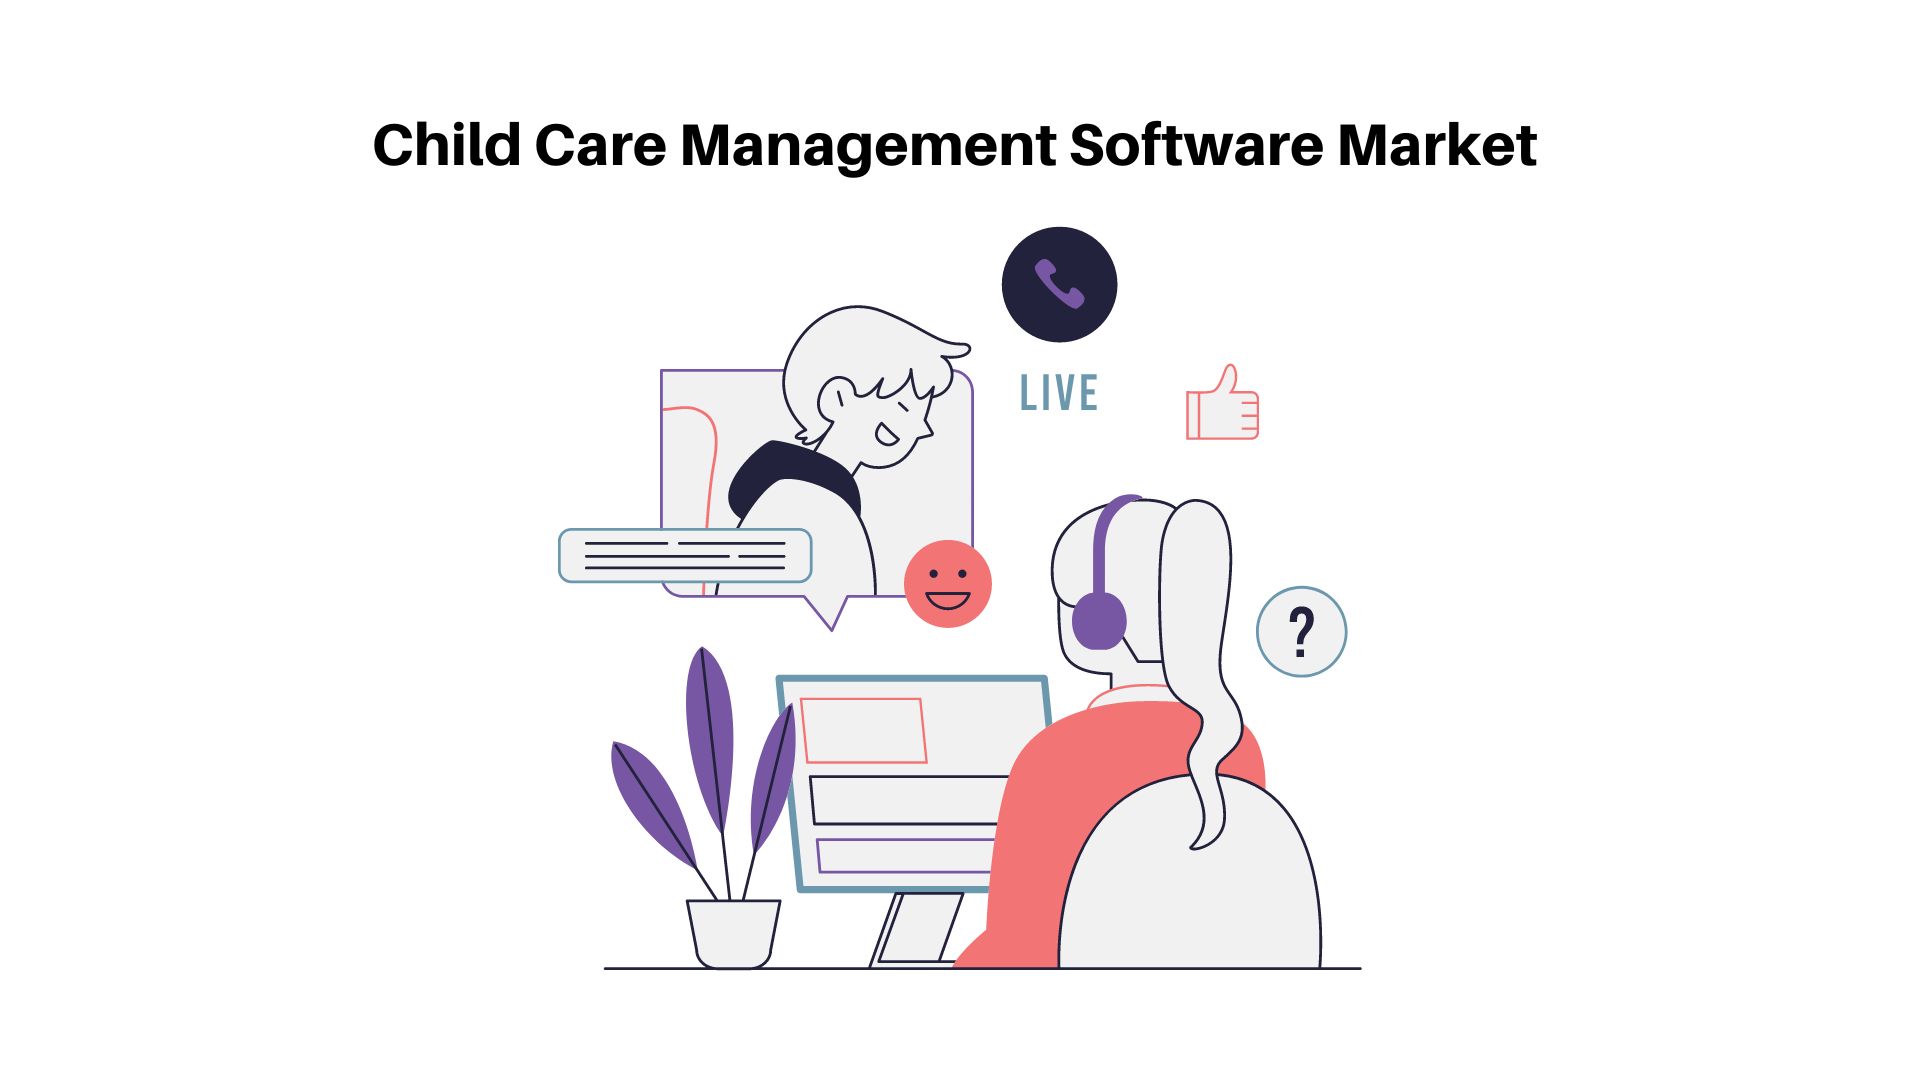 Child Care Management Software Market raise at a CAGR of 6.0% & Surpass USD 750.8 Mn by 2032